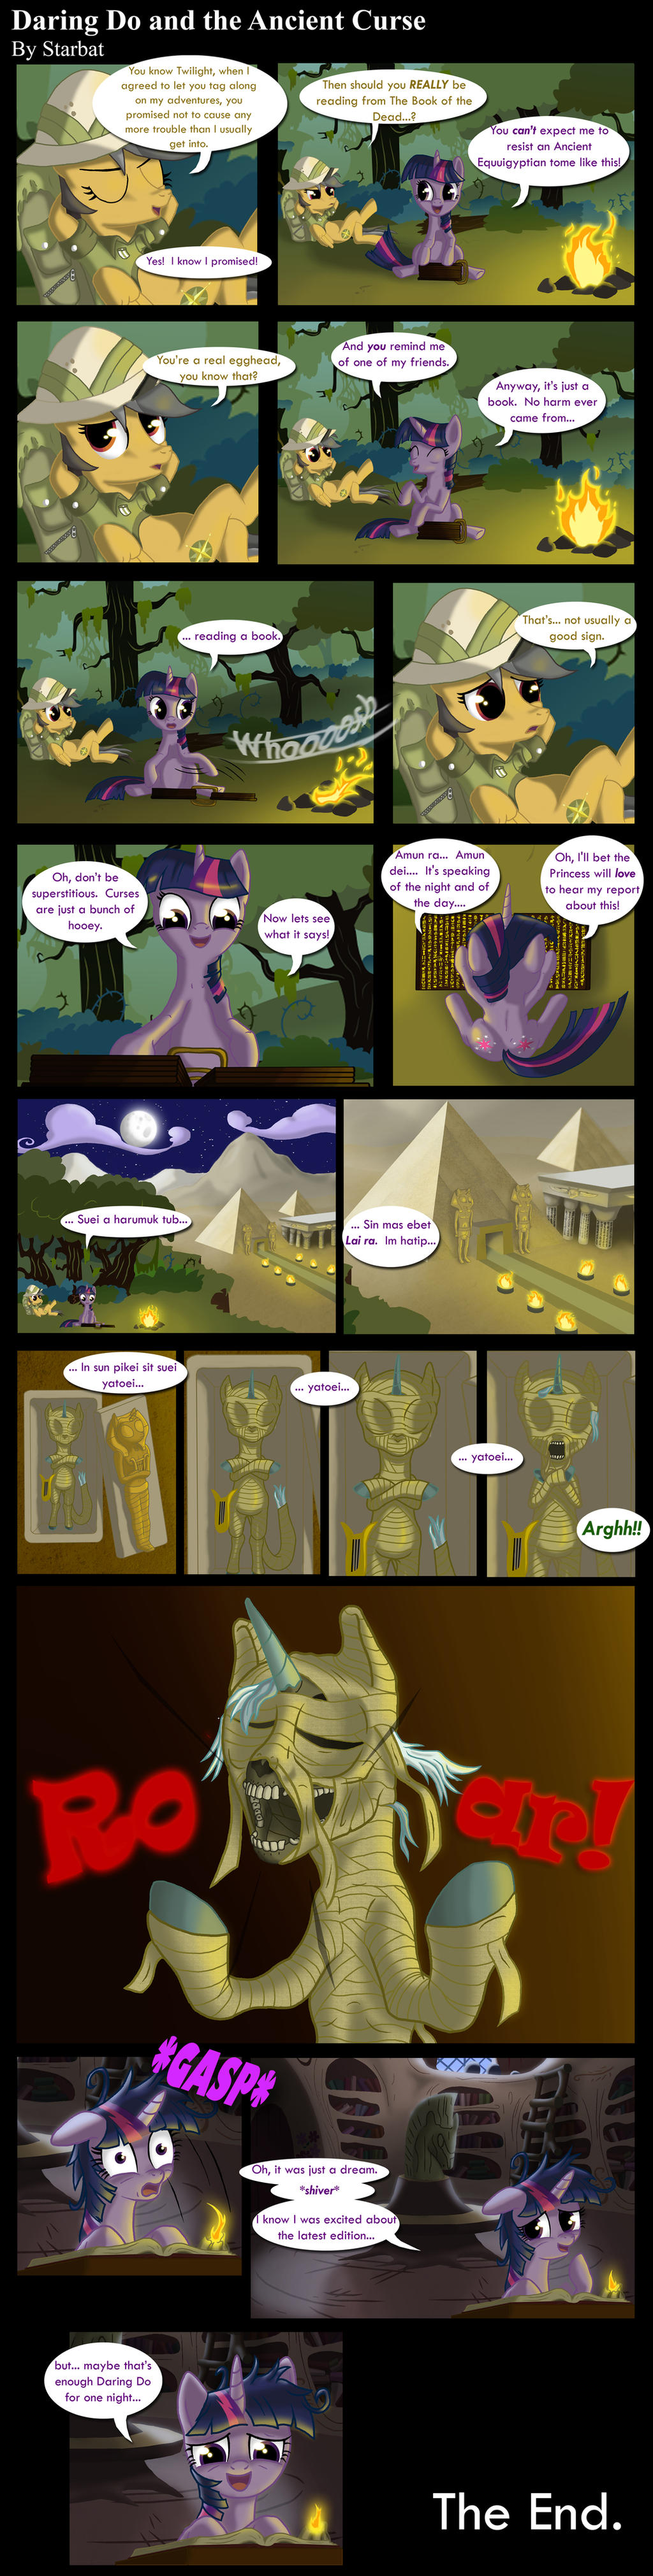 daring_do_and_the_ancient_curse_by_starb